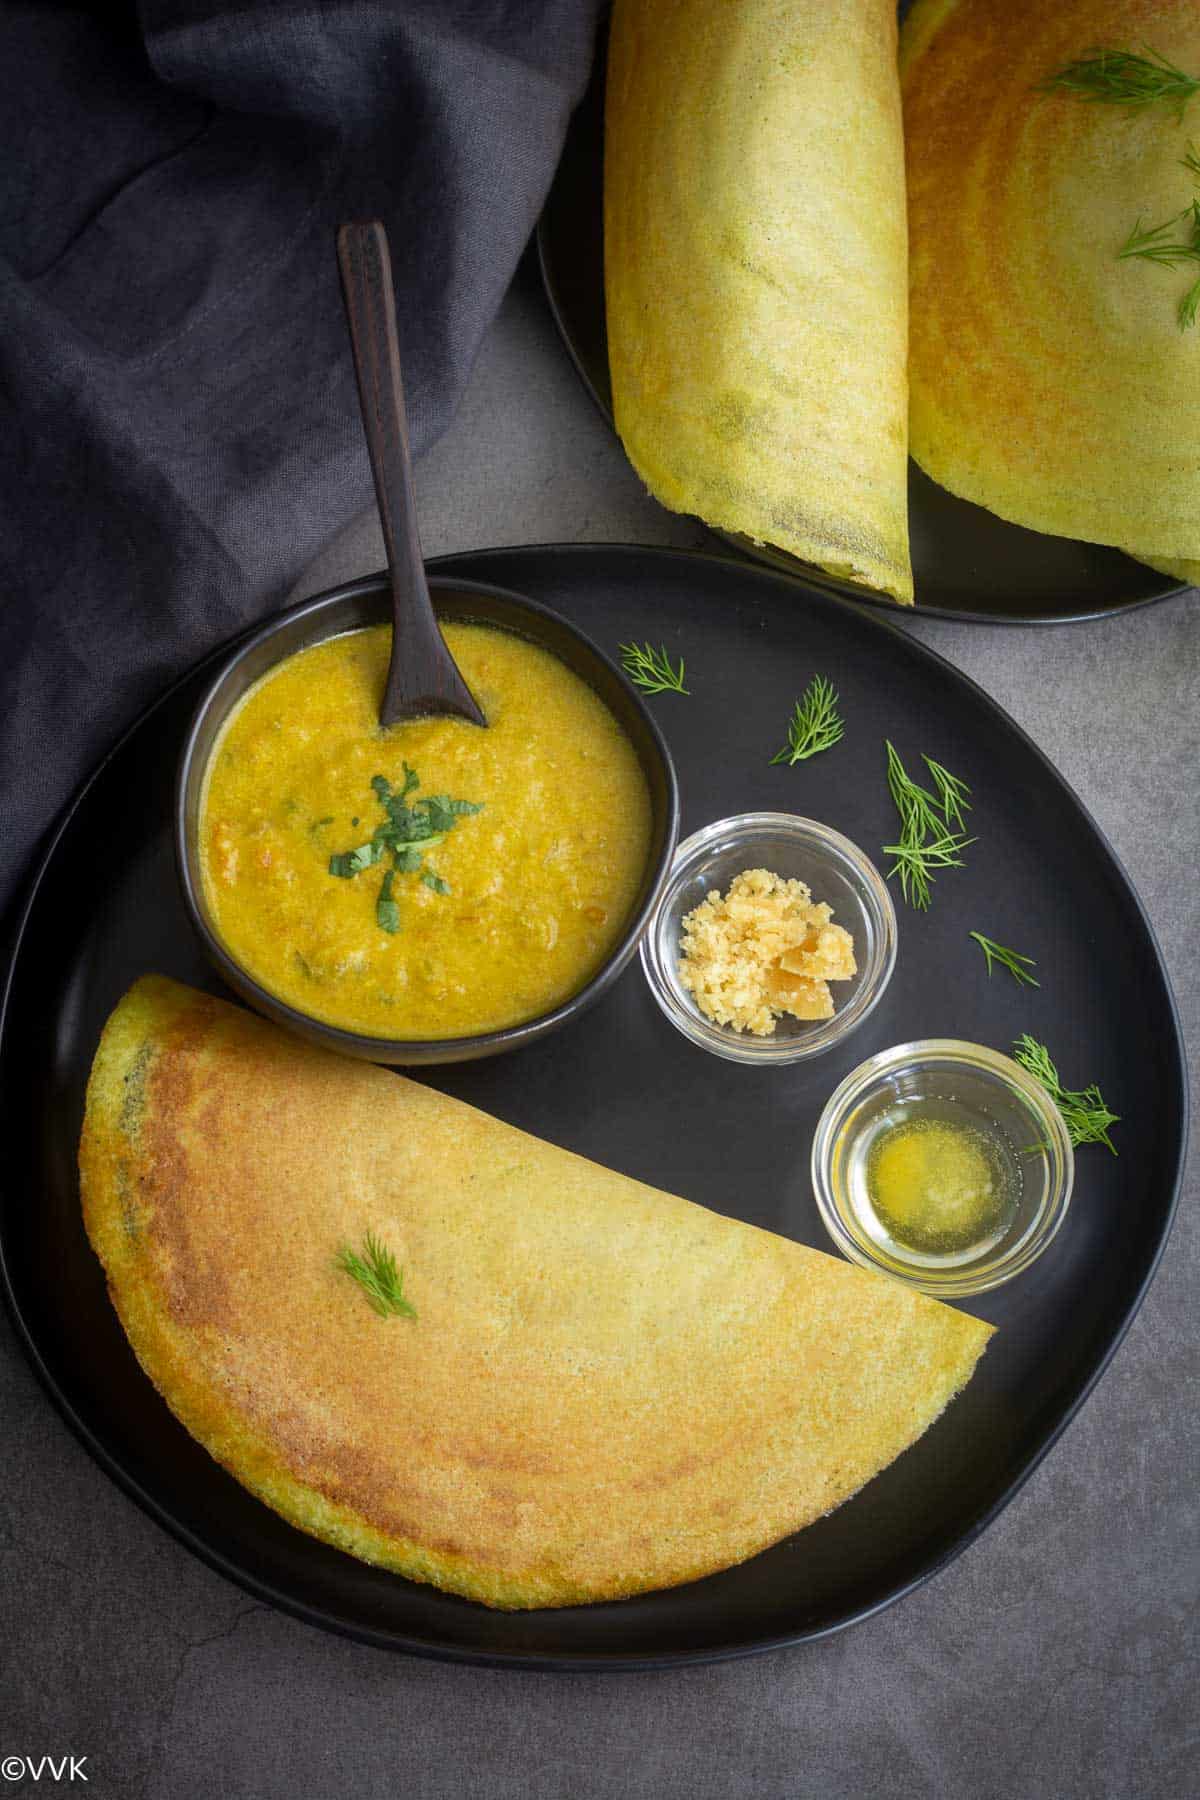 dill weed dosa served with kurma, jaggery and ghee in a black plate with more dosa on the side